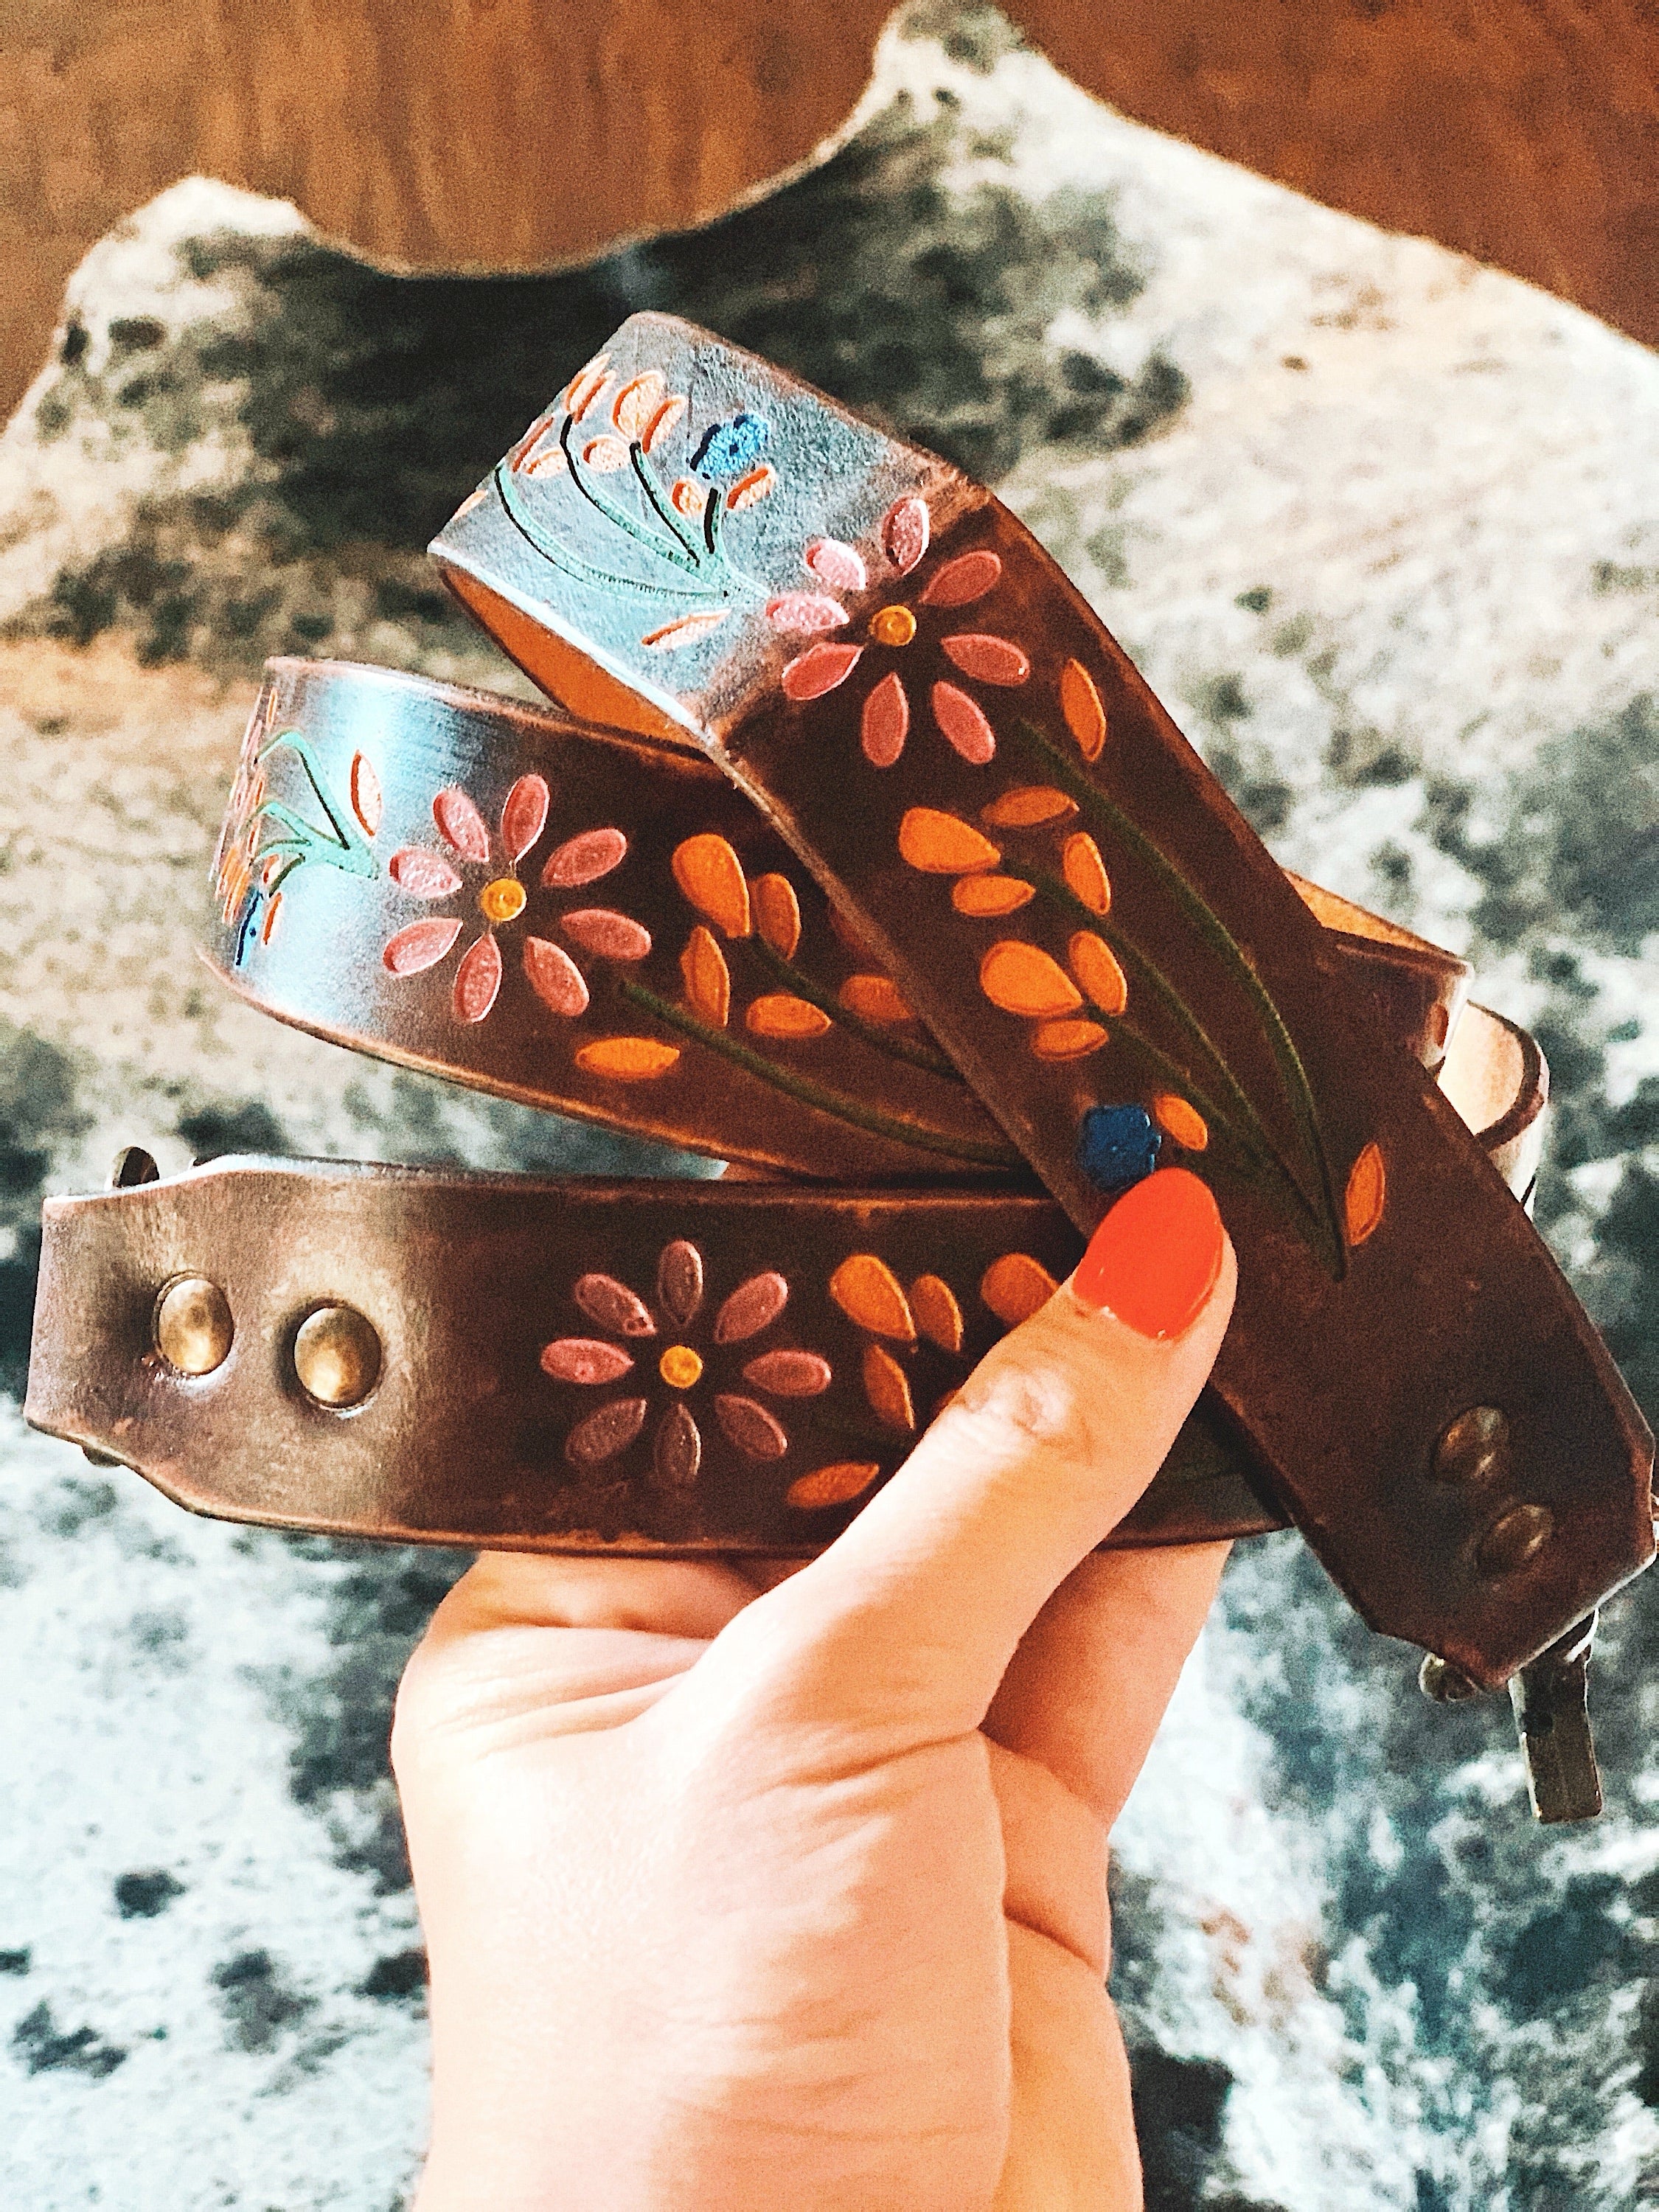 Tooled Leather Purse Straps Colorful Paisley